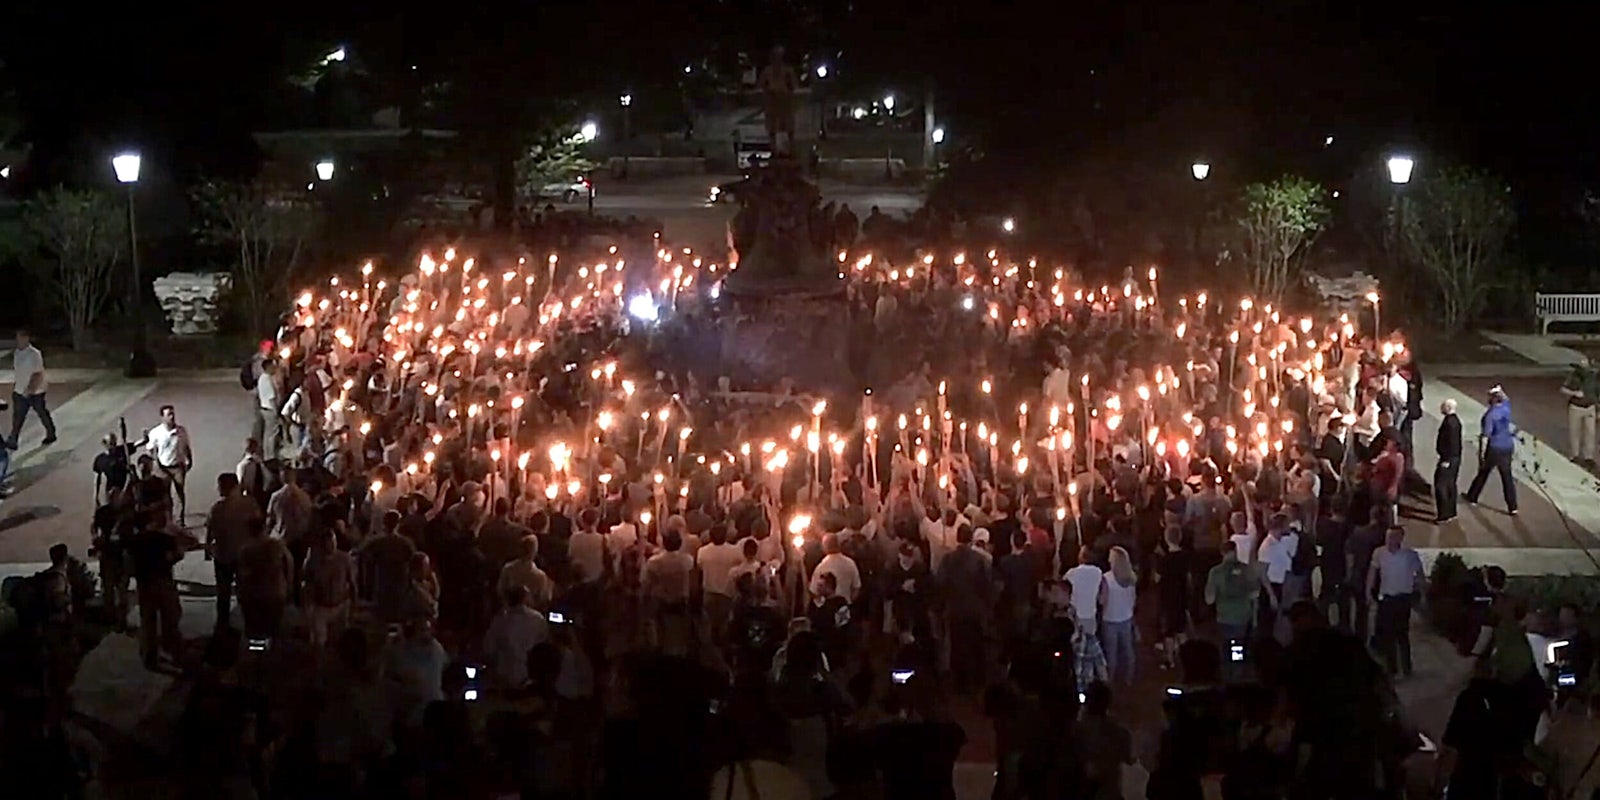 Alt-right white supremacists rally around Confederate statue with tiki torches at UVA